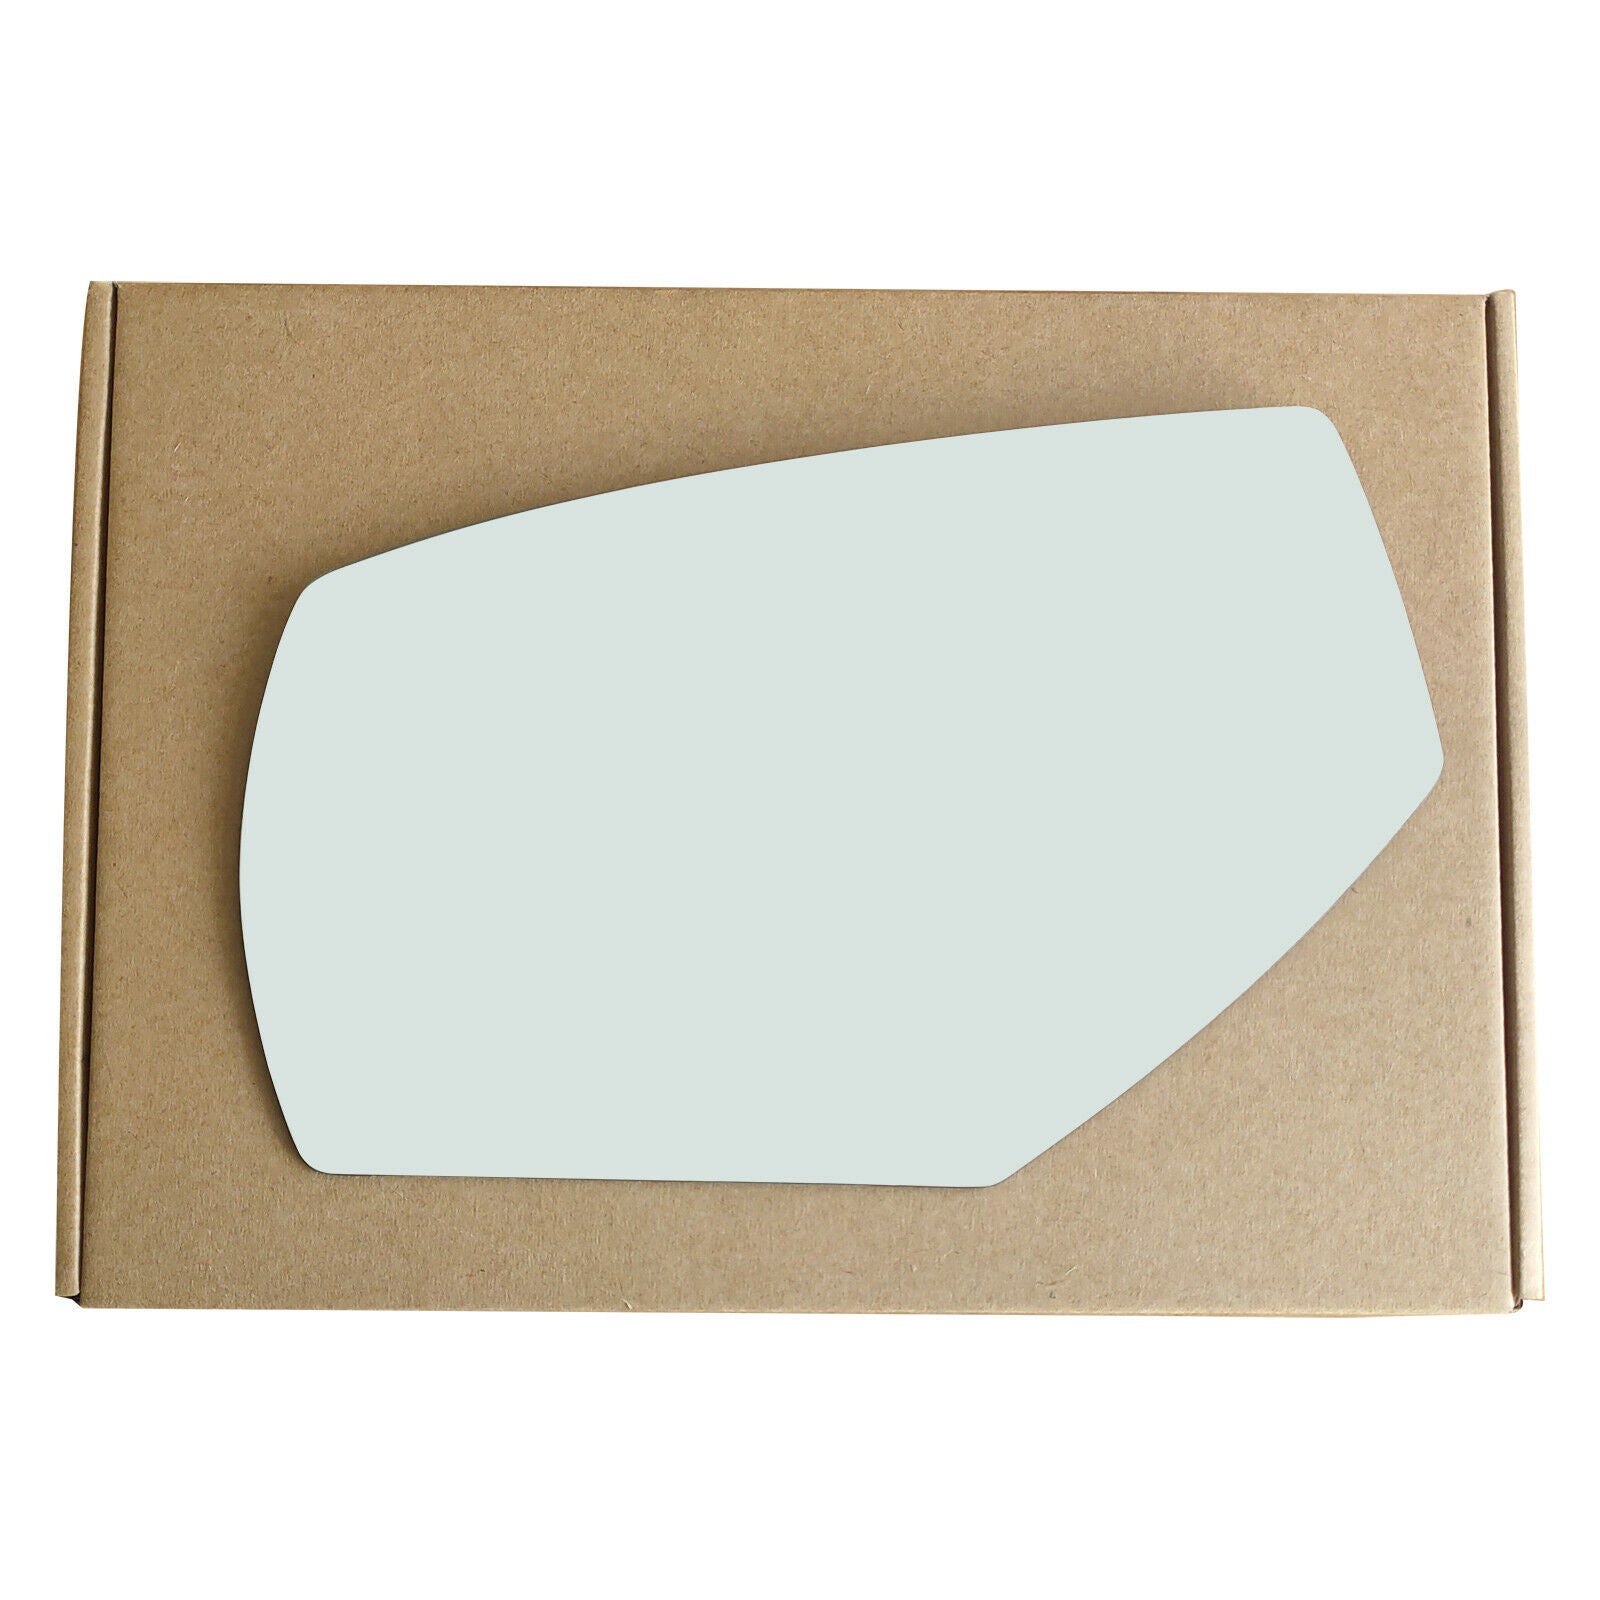 WLLW Replace Mirror Glass for 2014-2019 Chevrolet Silverado 1500 2500 3500/2014-2019 GMC Sierra 1500 Limited 2500 3500, Driver Left Side LH/Passenger Right Side RH/The Both Sides Flat Convex M-0043